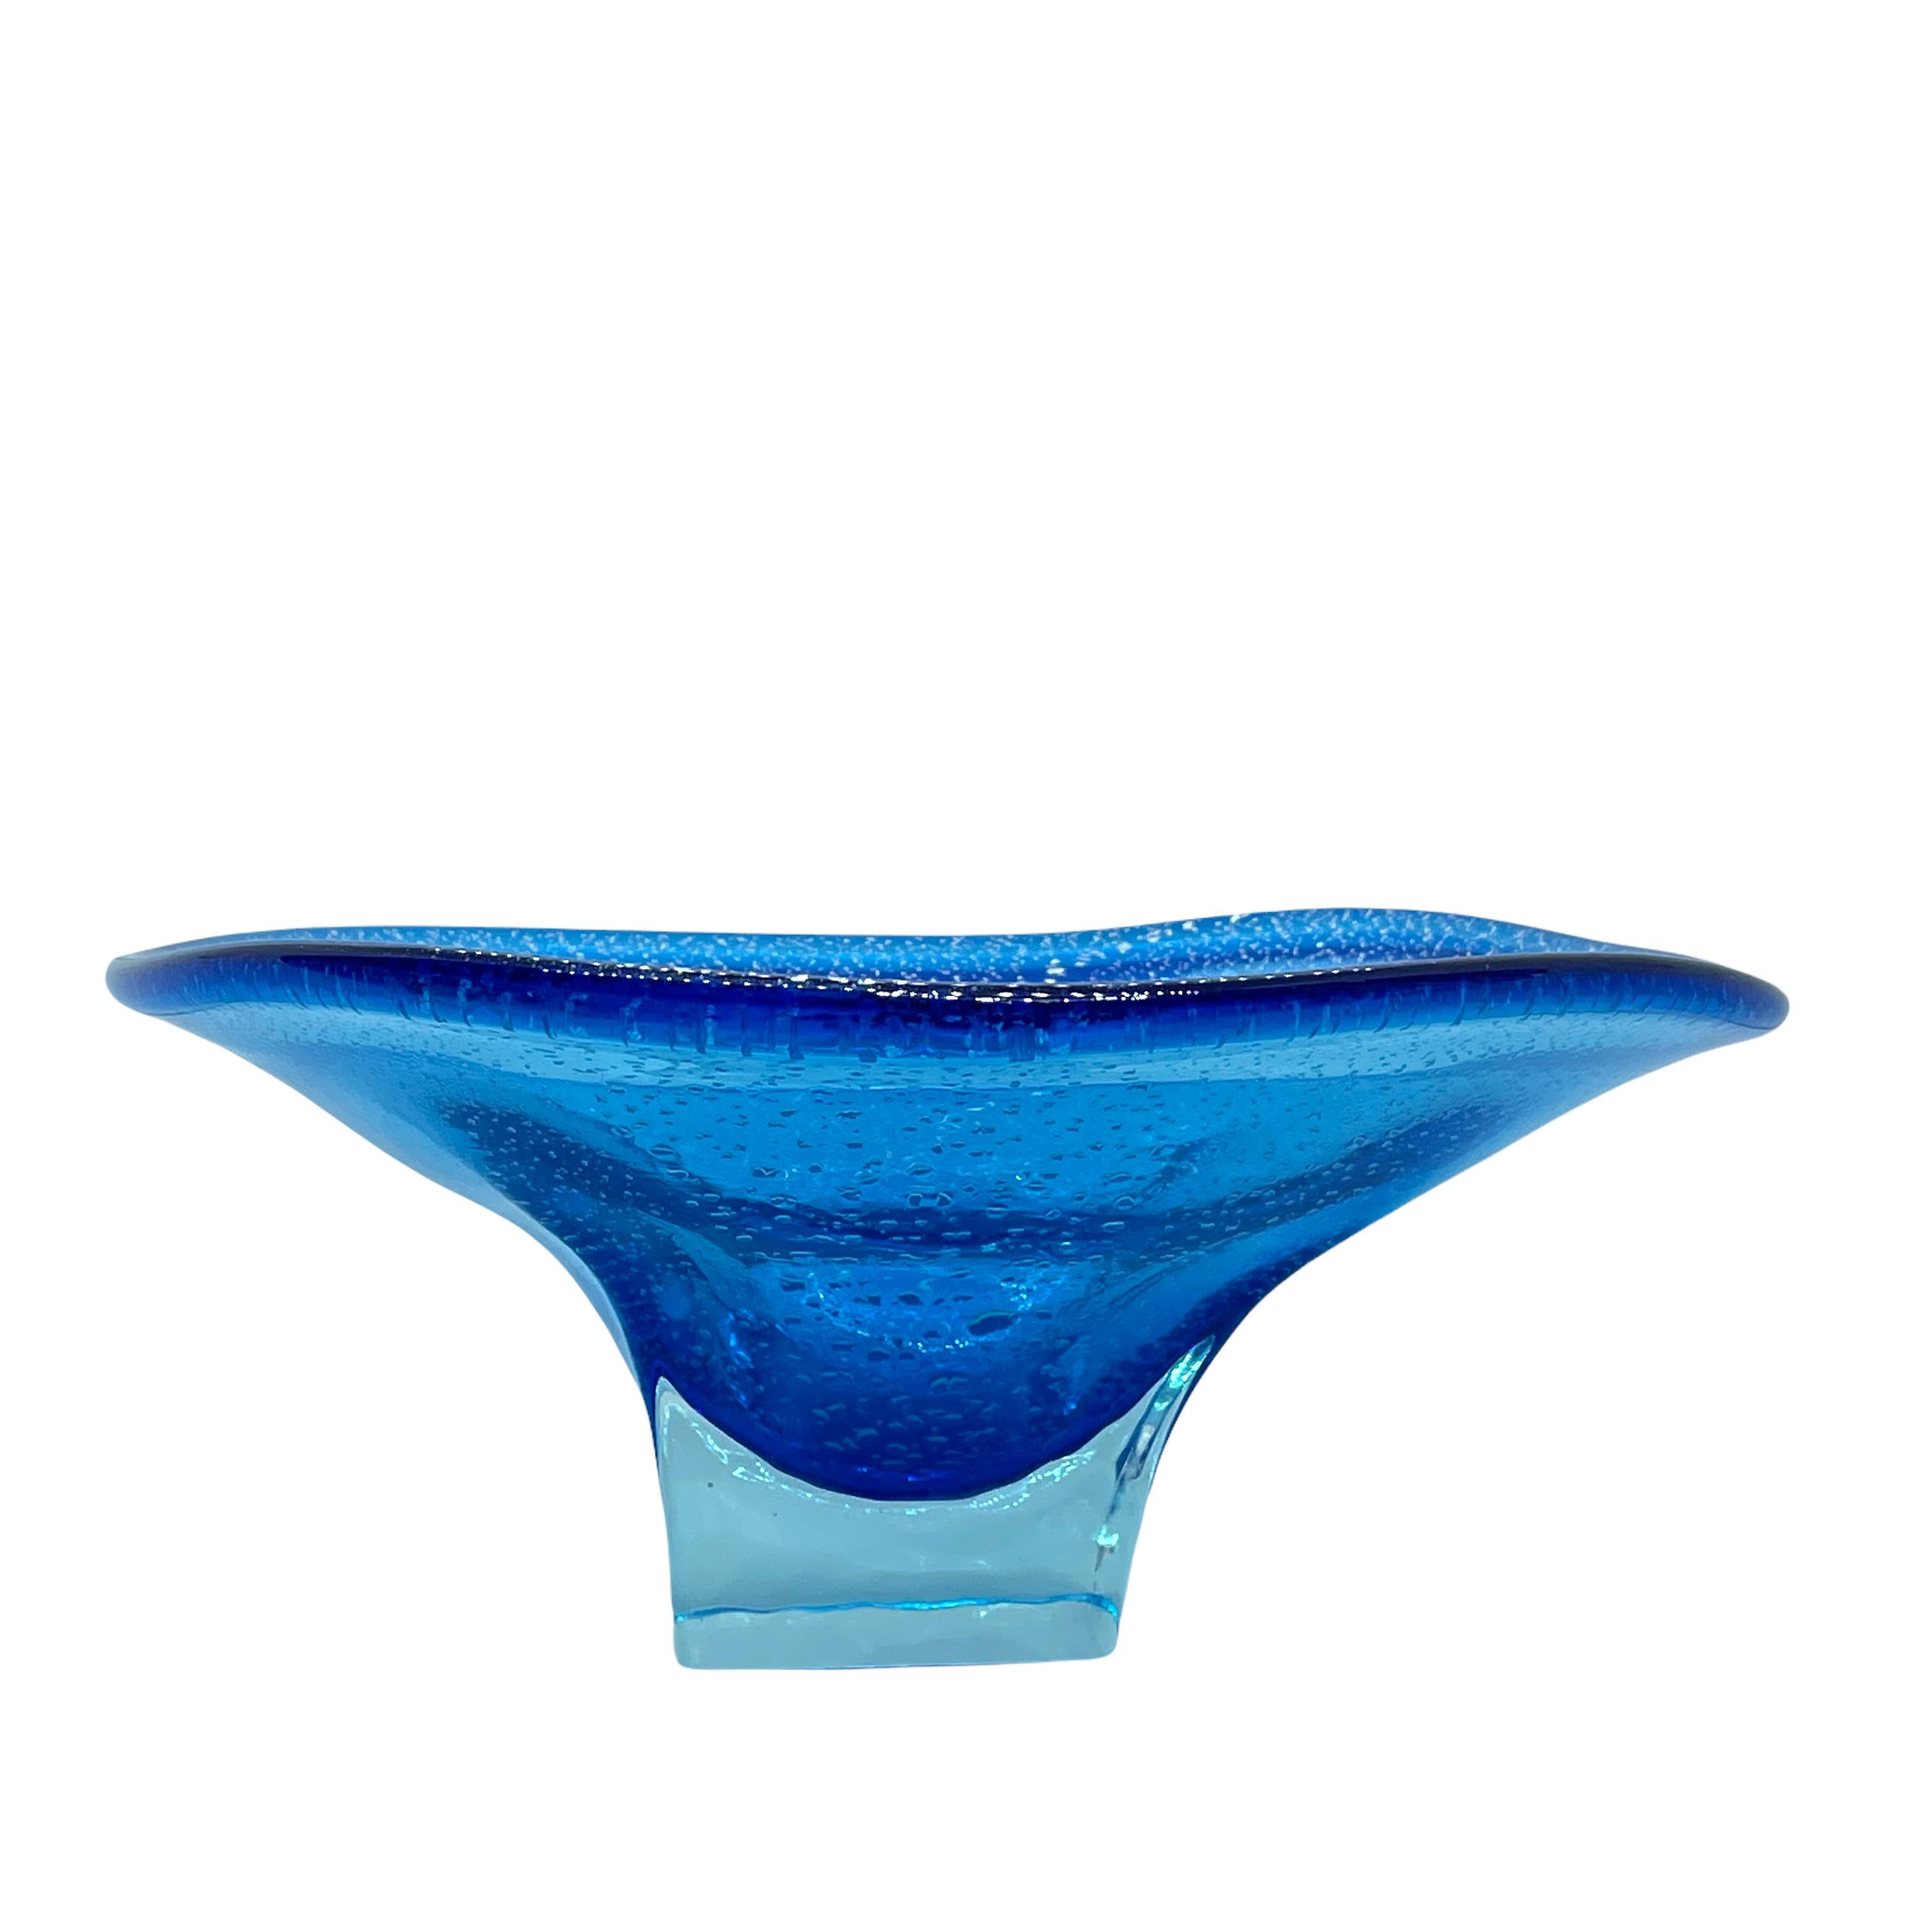 Late 20th Century Stunning Murano Glass Bowl Catchall Blue and Clear, Vintage, Italy, 1980s For Sale